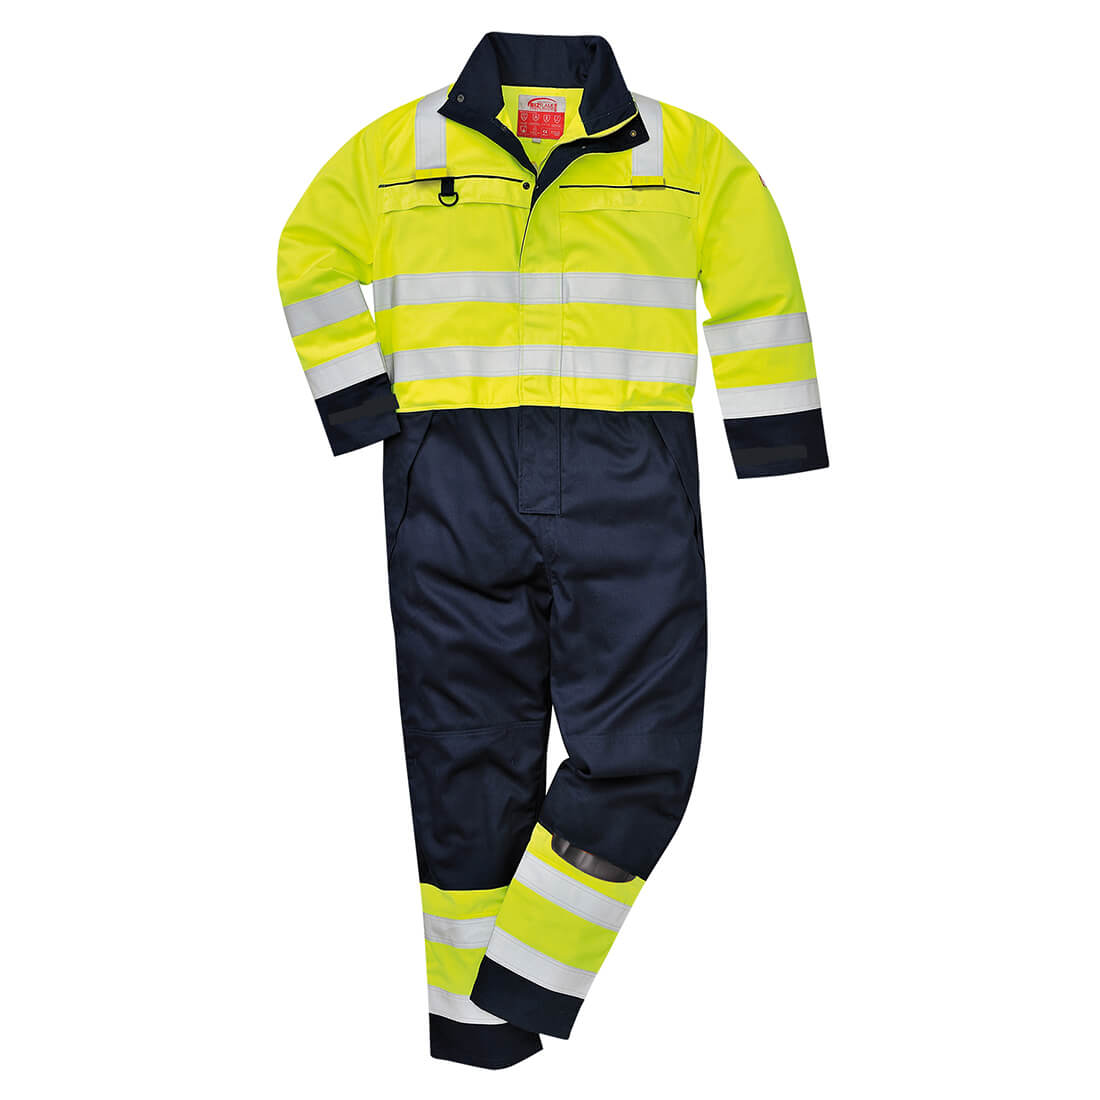 Image of Biz Flame Hi Vis Multi-Norm Flame Resistant Coverall Yellow / Navy 4XL